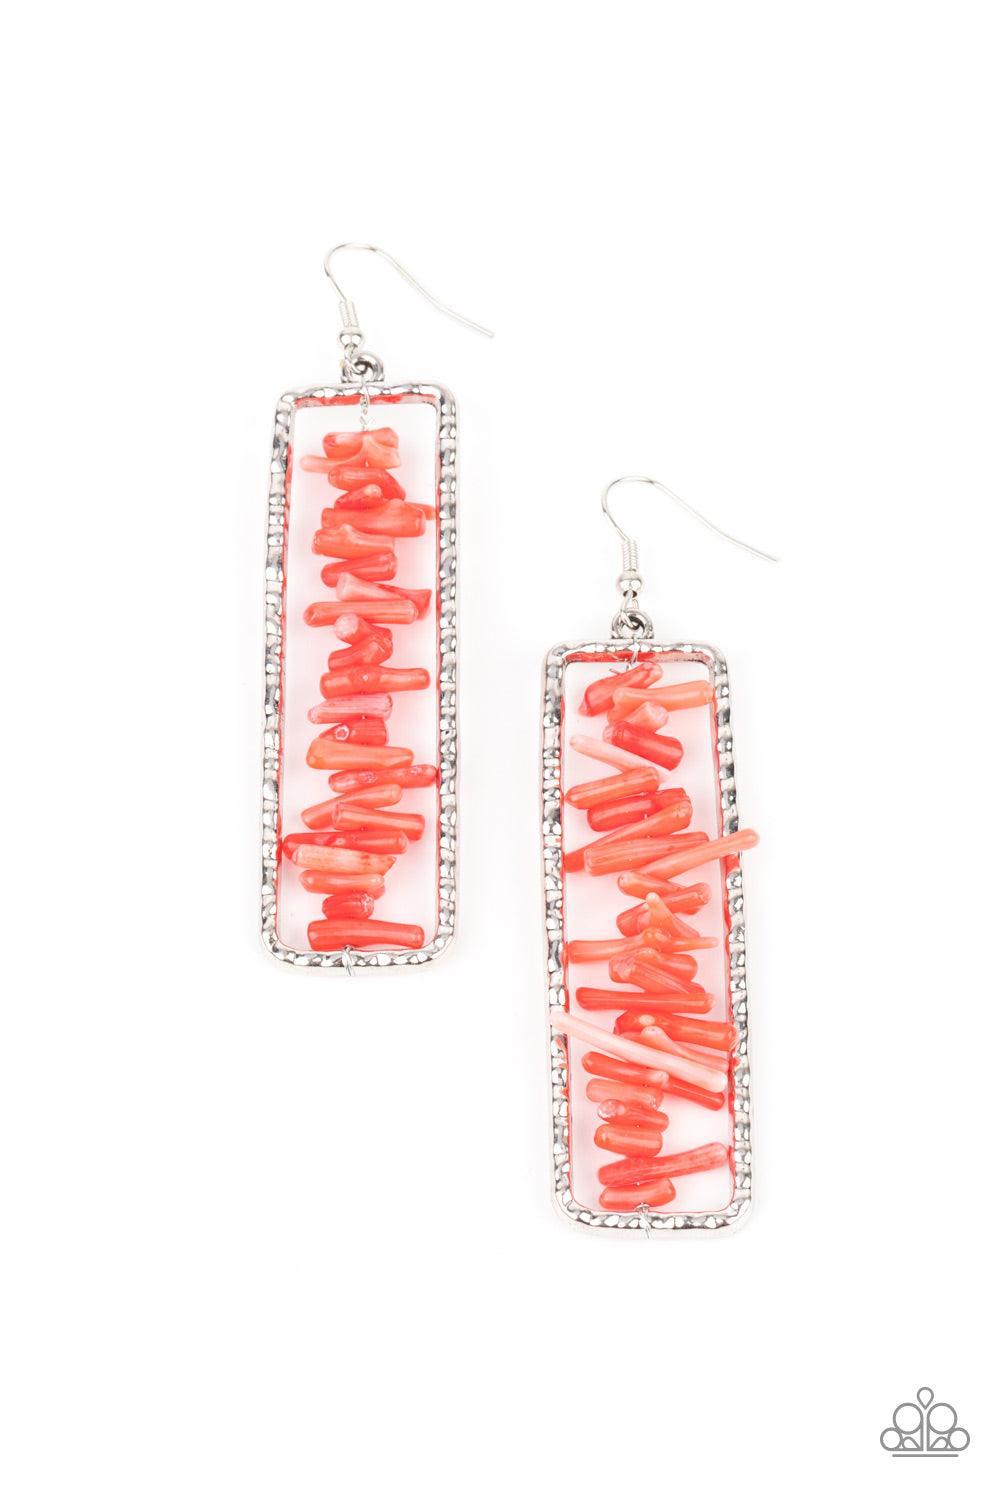 Paparazzi Accessories Don’t QUARRY, Be Happy - Red Bits of linear red rock are threaded along a metal rod inside a hammered silver rectangle, creating an earthy frame. Earring attaches to a standard fishhook fitting. Sold as one pair of earrings. Earrings